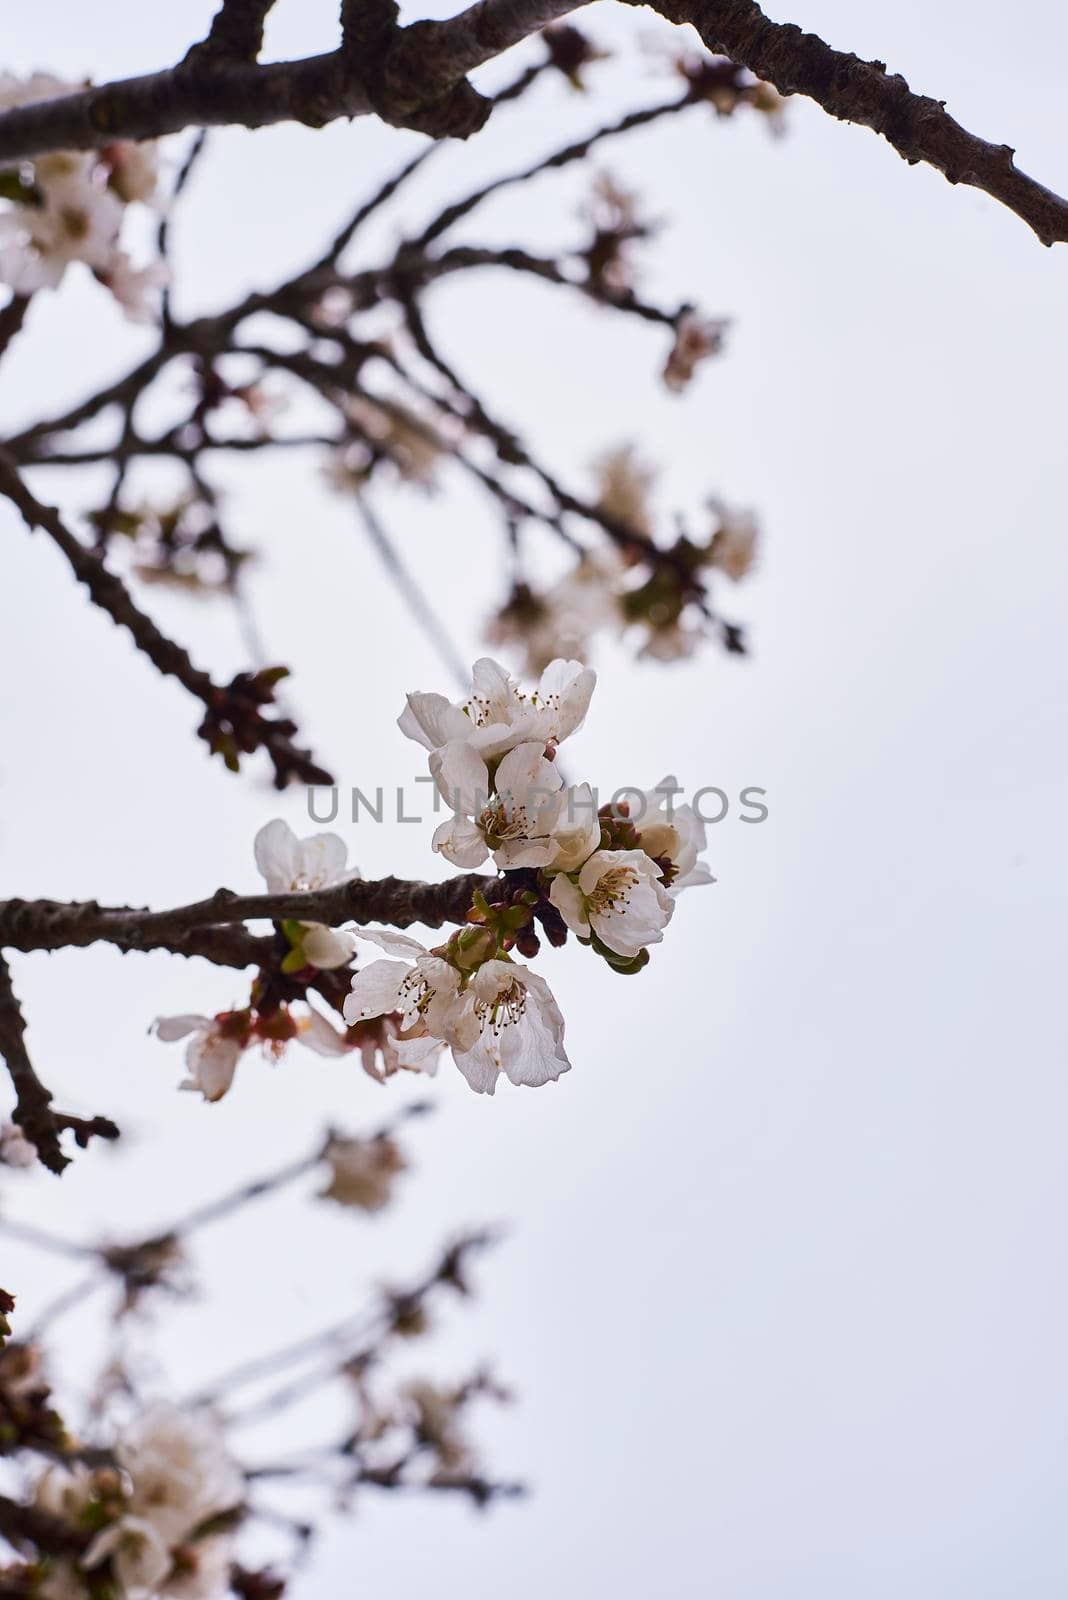 Some cherry blossoms on the tree, blurred background, grey sky, solitary, detail photo, close-up